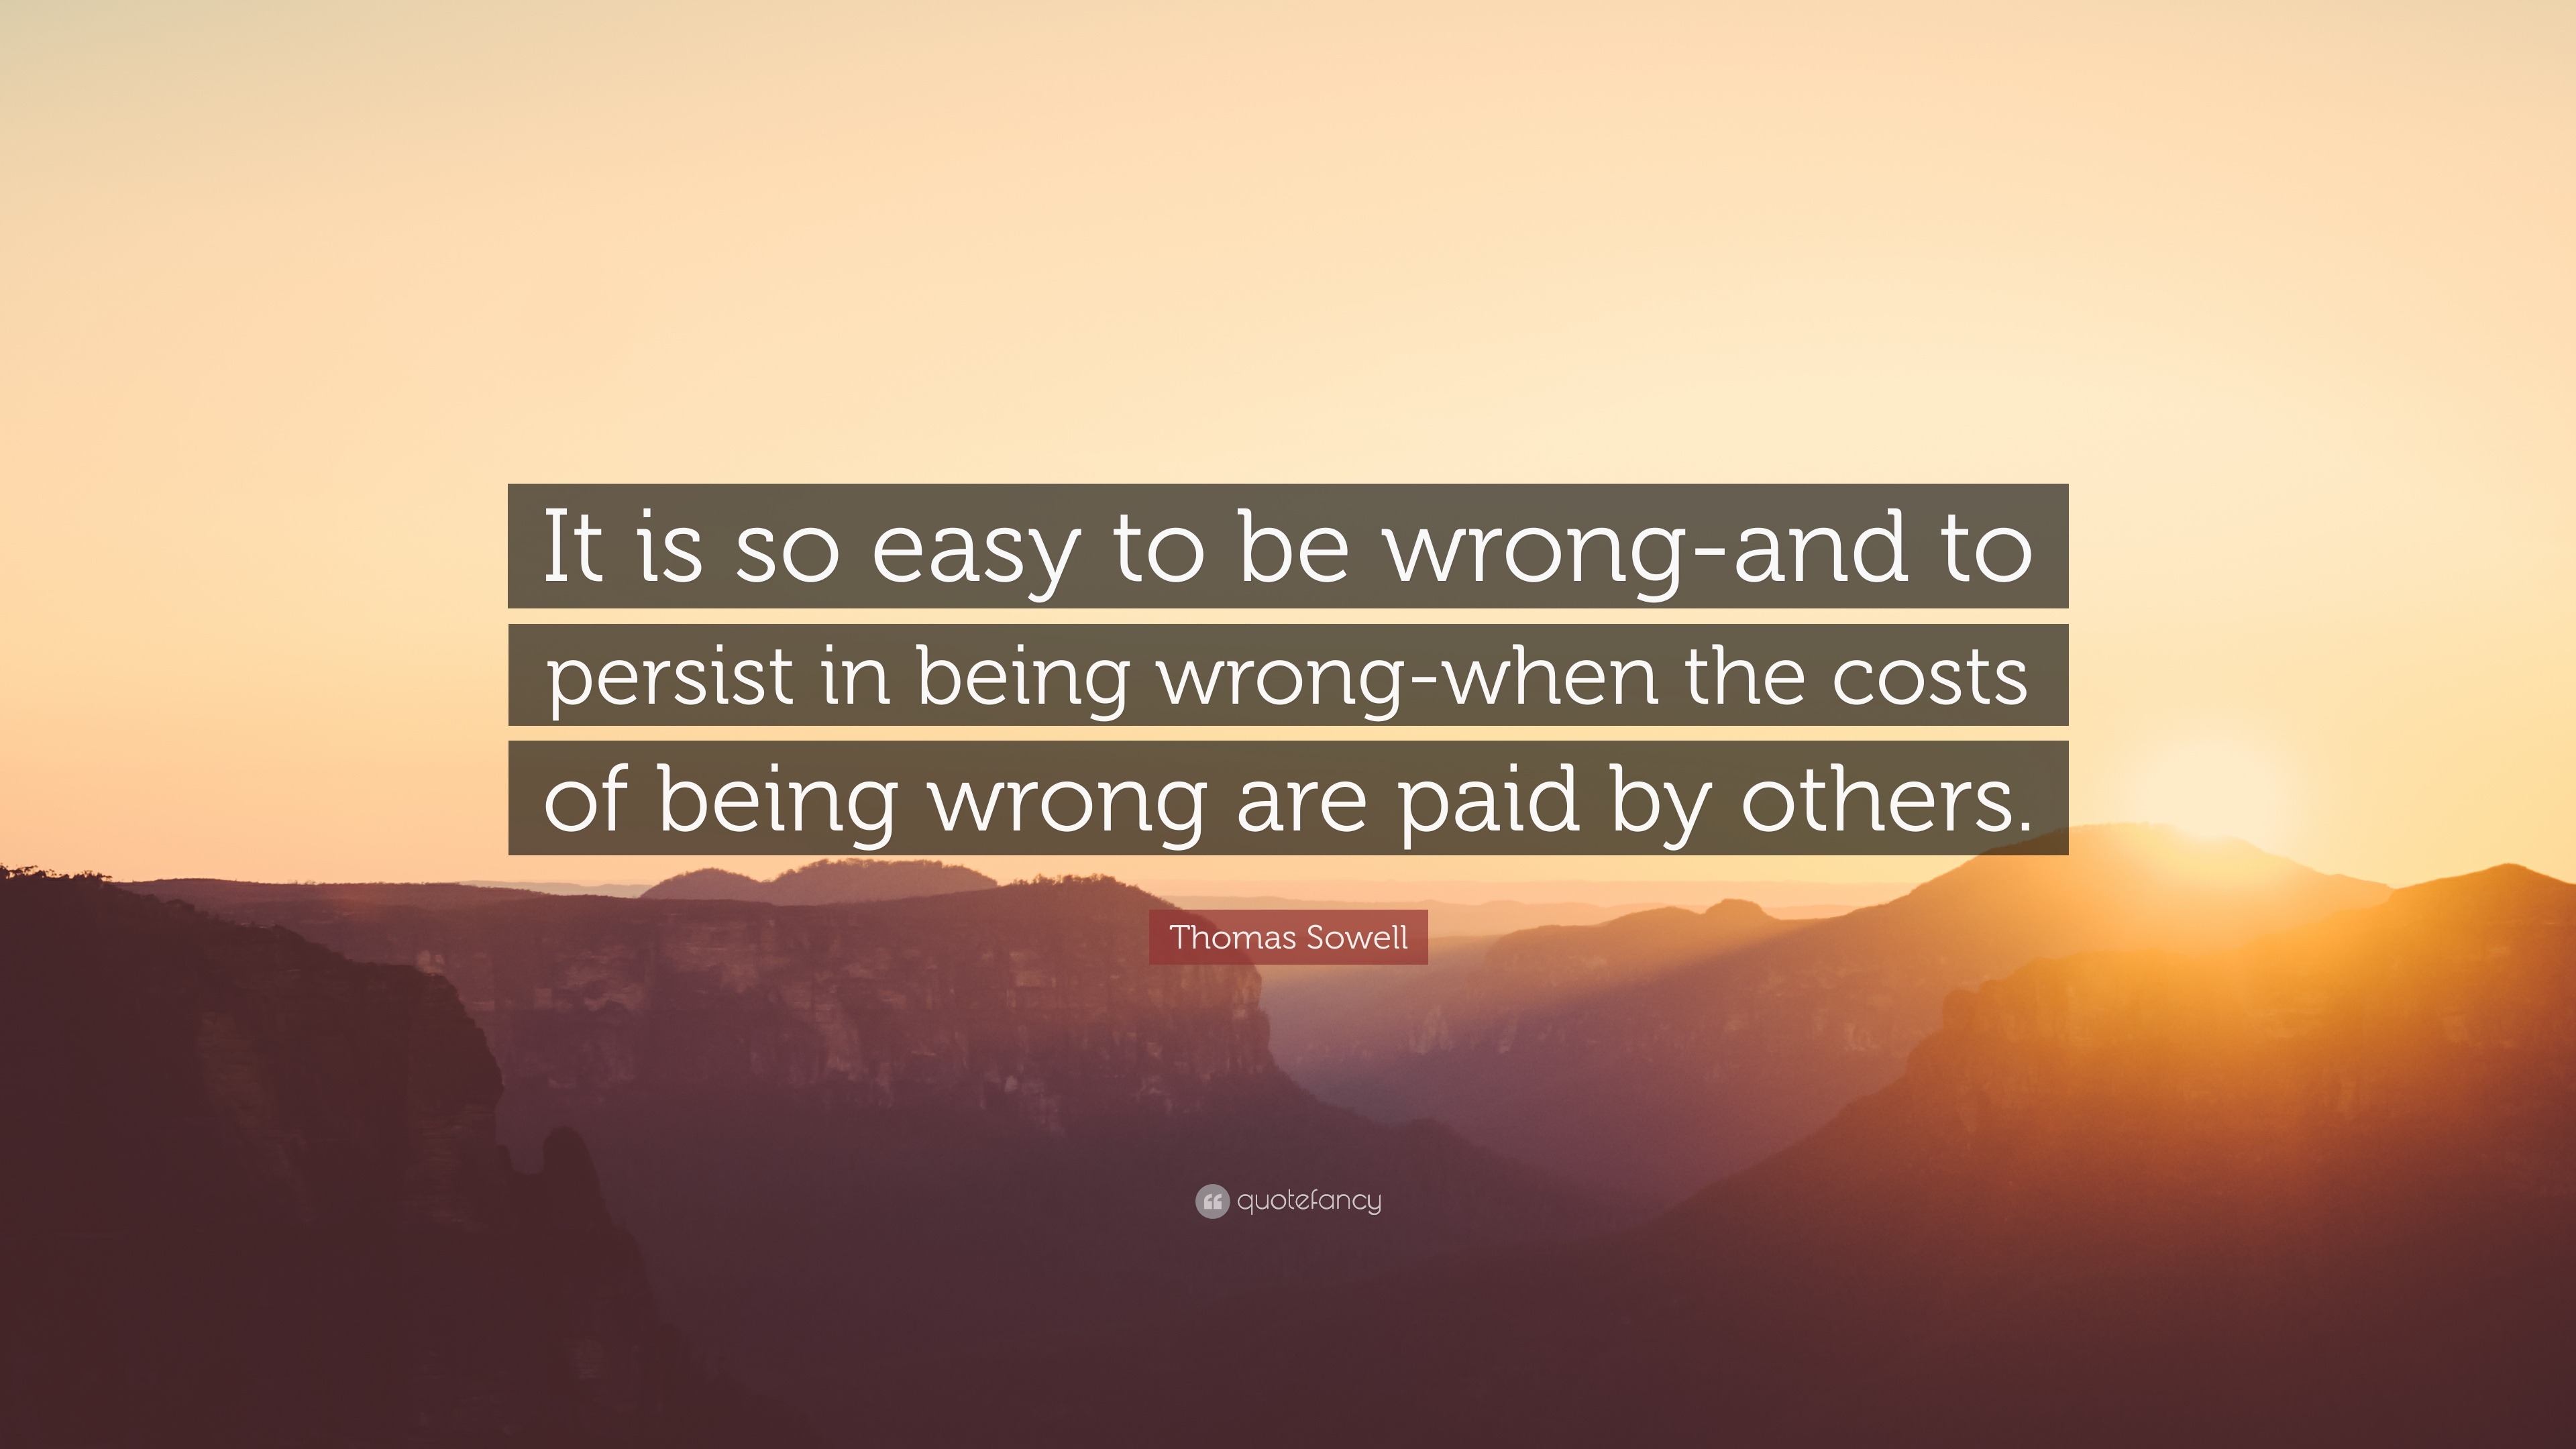 thomas sowell quote: "it is so easy to be wrong-and to persist